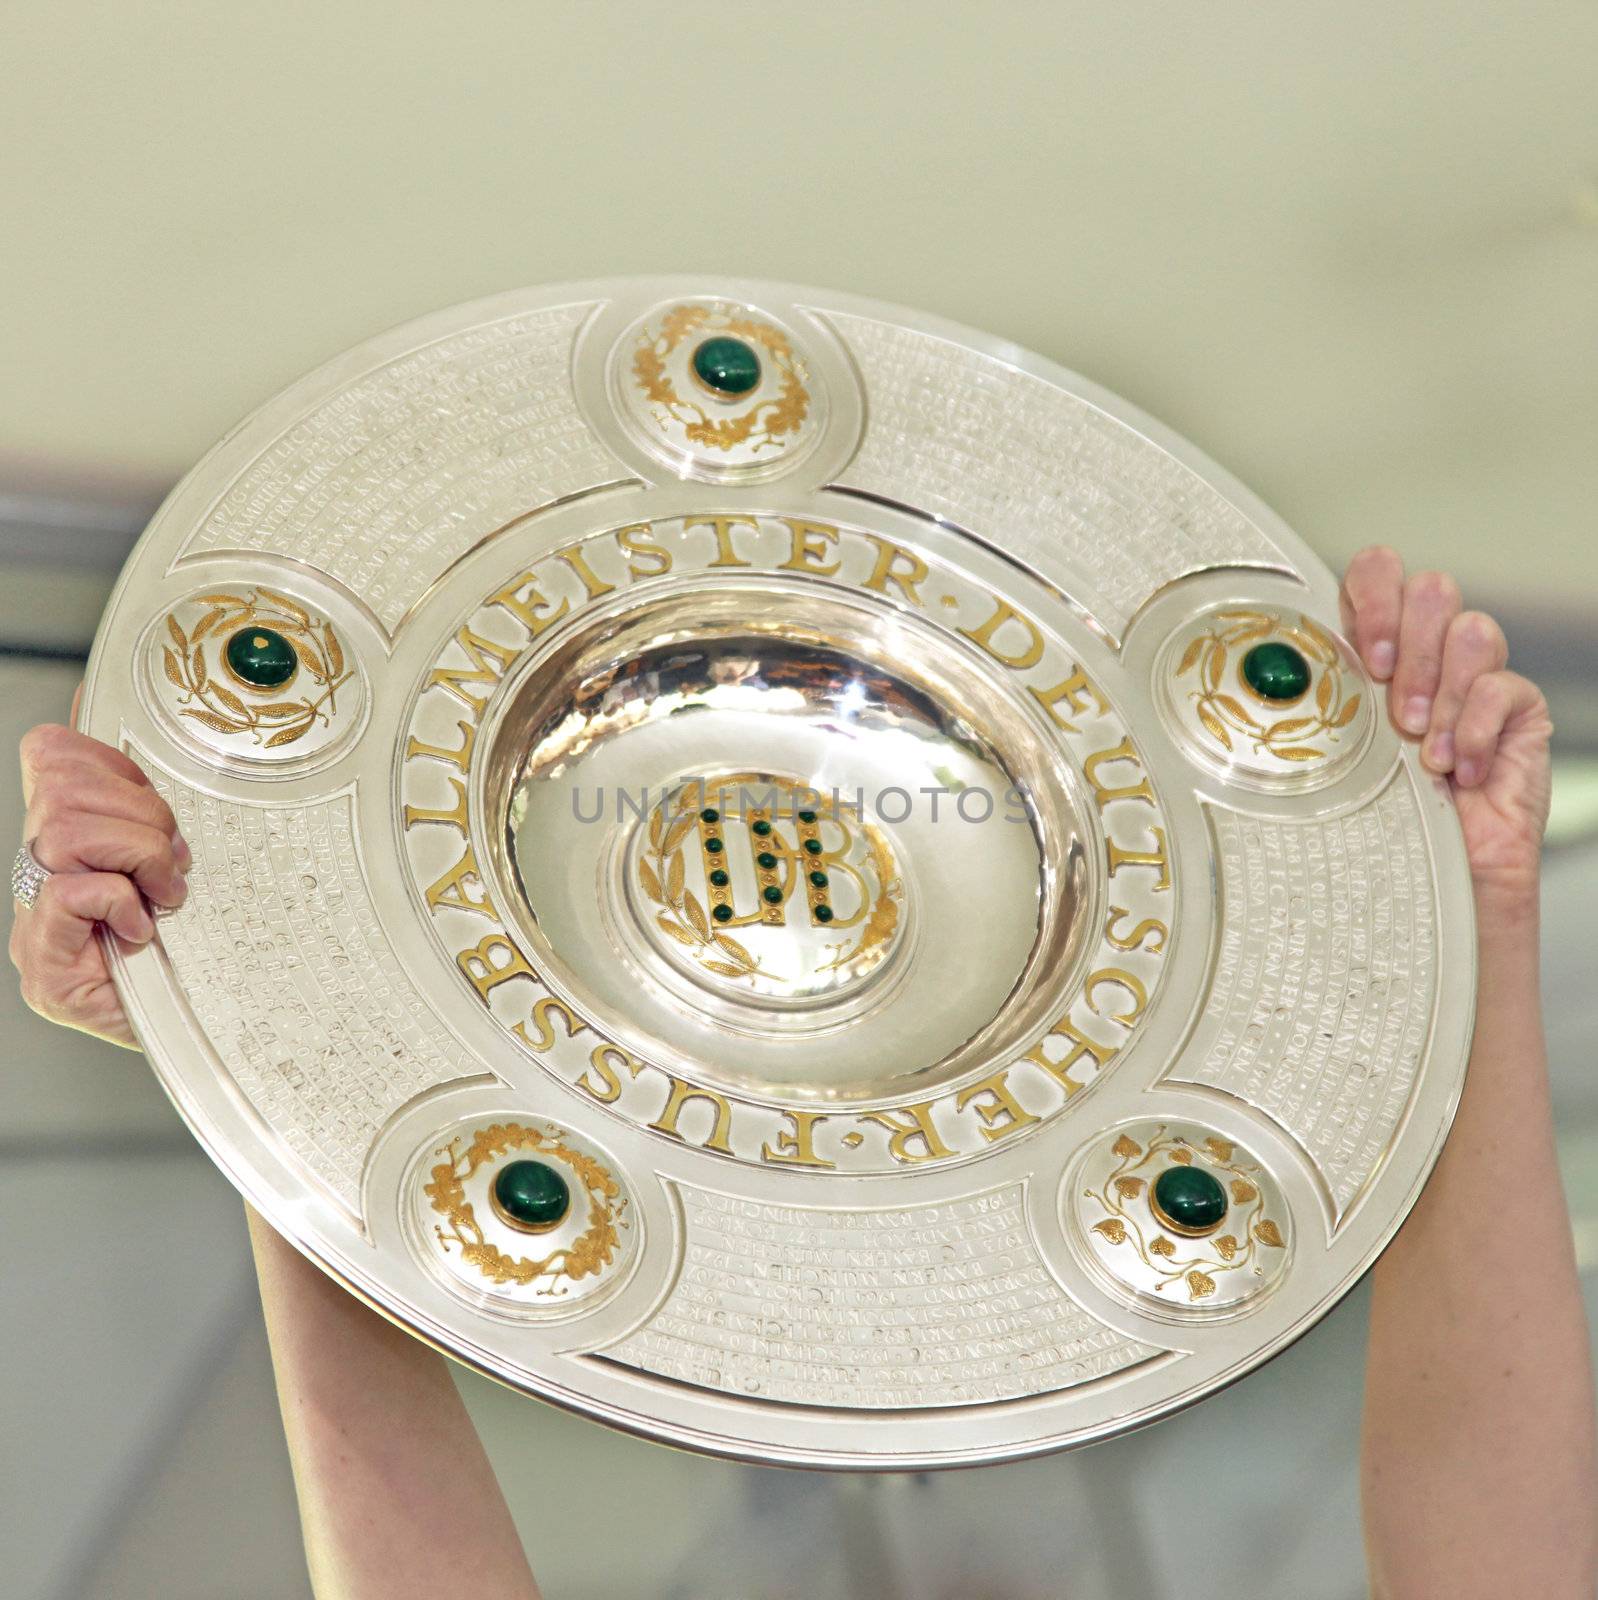 The award for the championship trophy as German football champions is held high - square